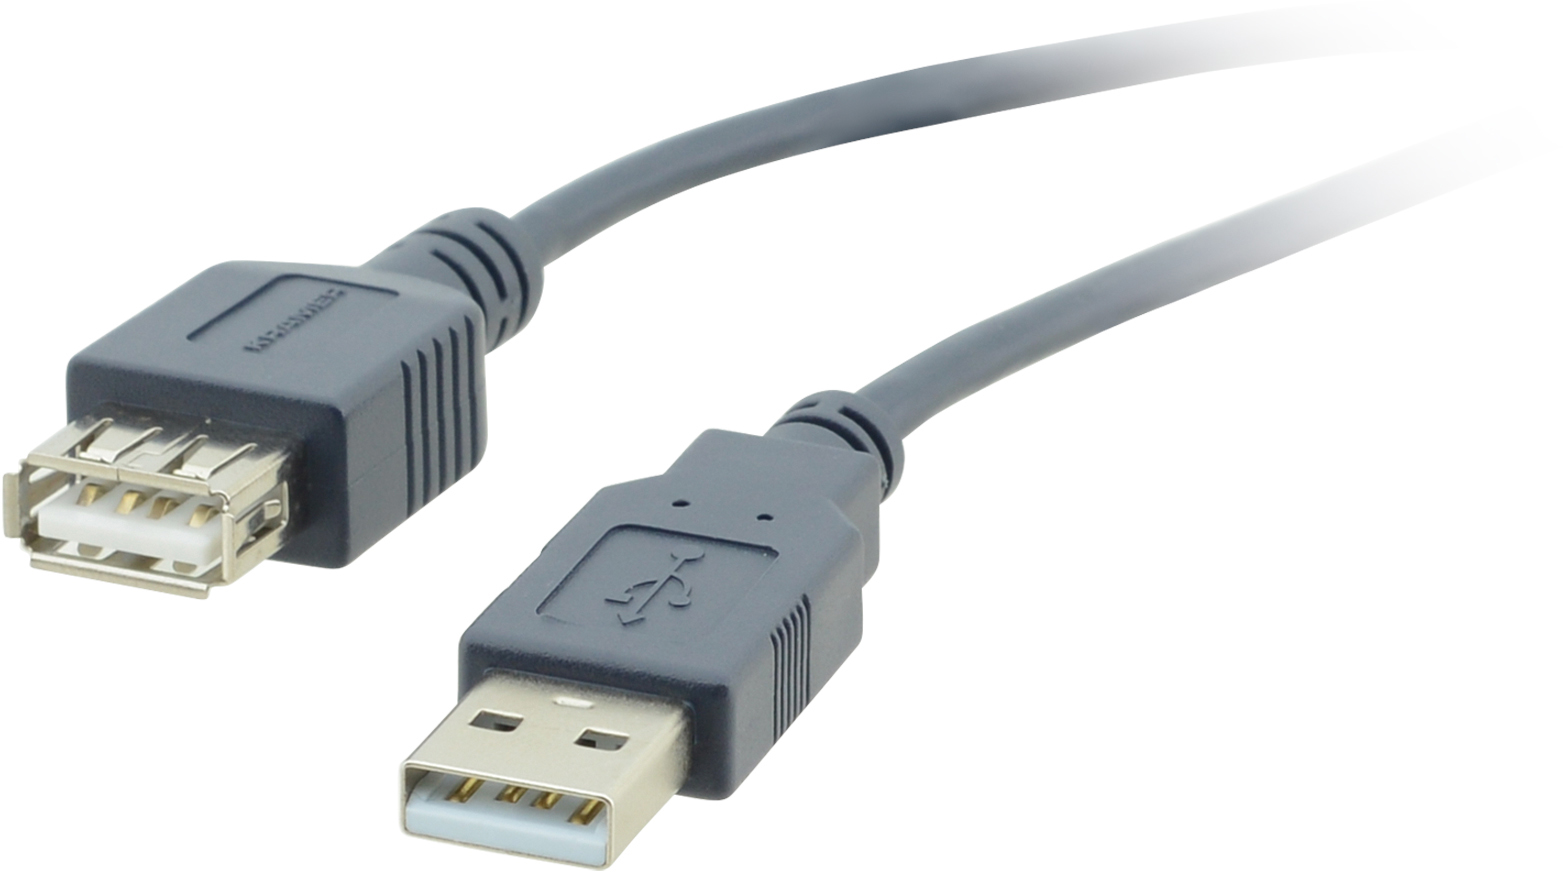 Kramer USB 2.0 A to A Ext Cable